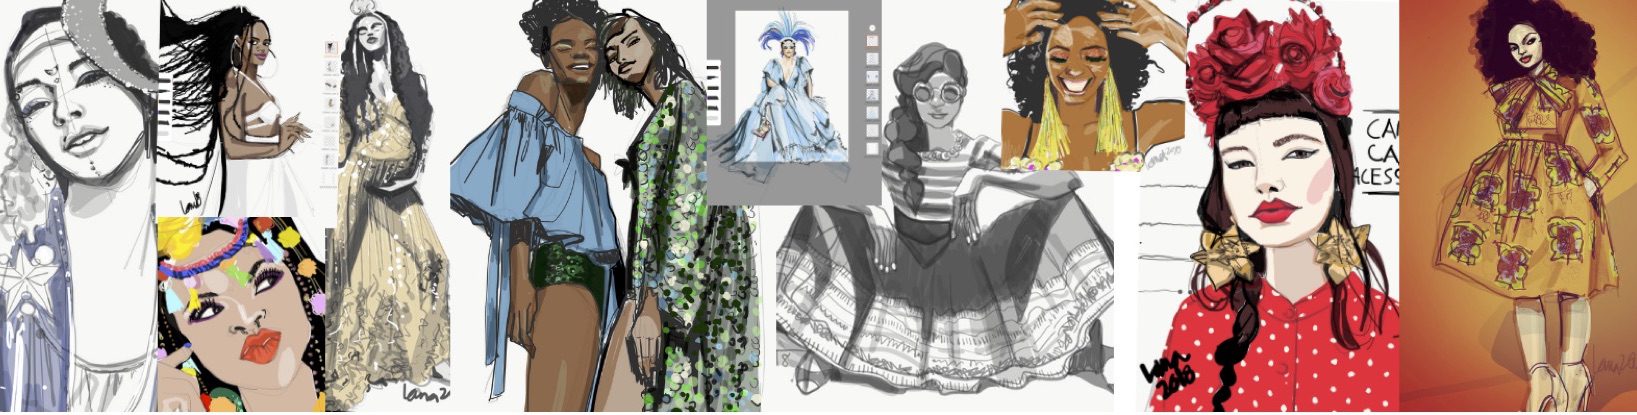 How to present fashion sketches to reach more people and get better likes -  sewingnpatterns